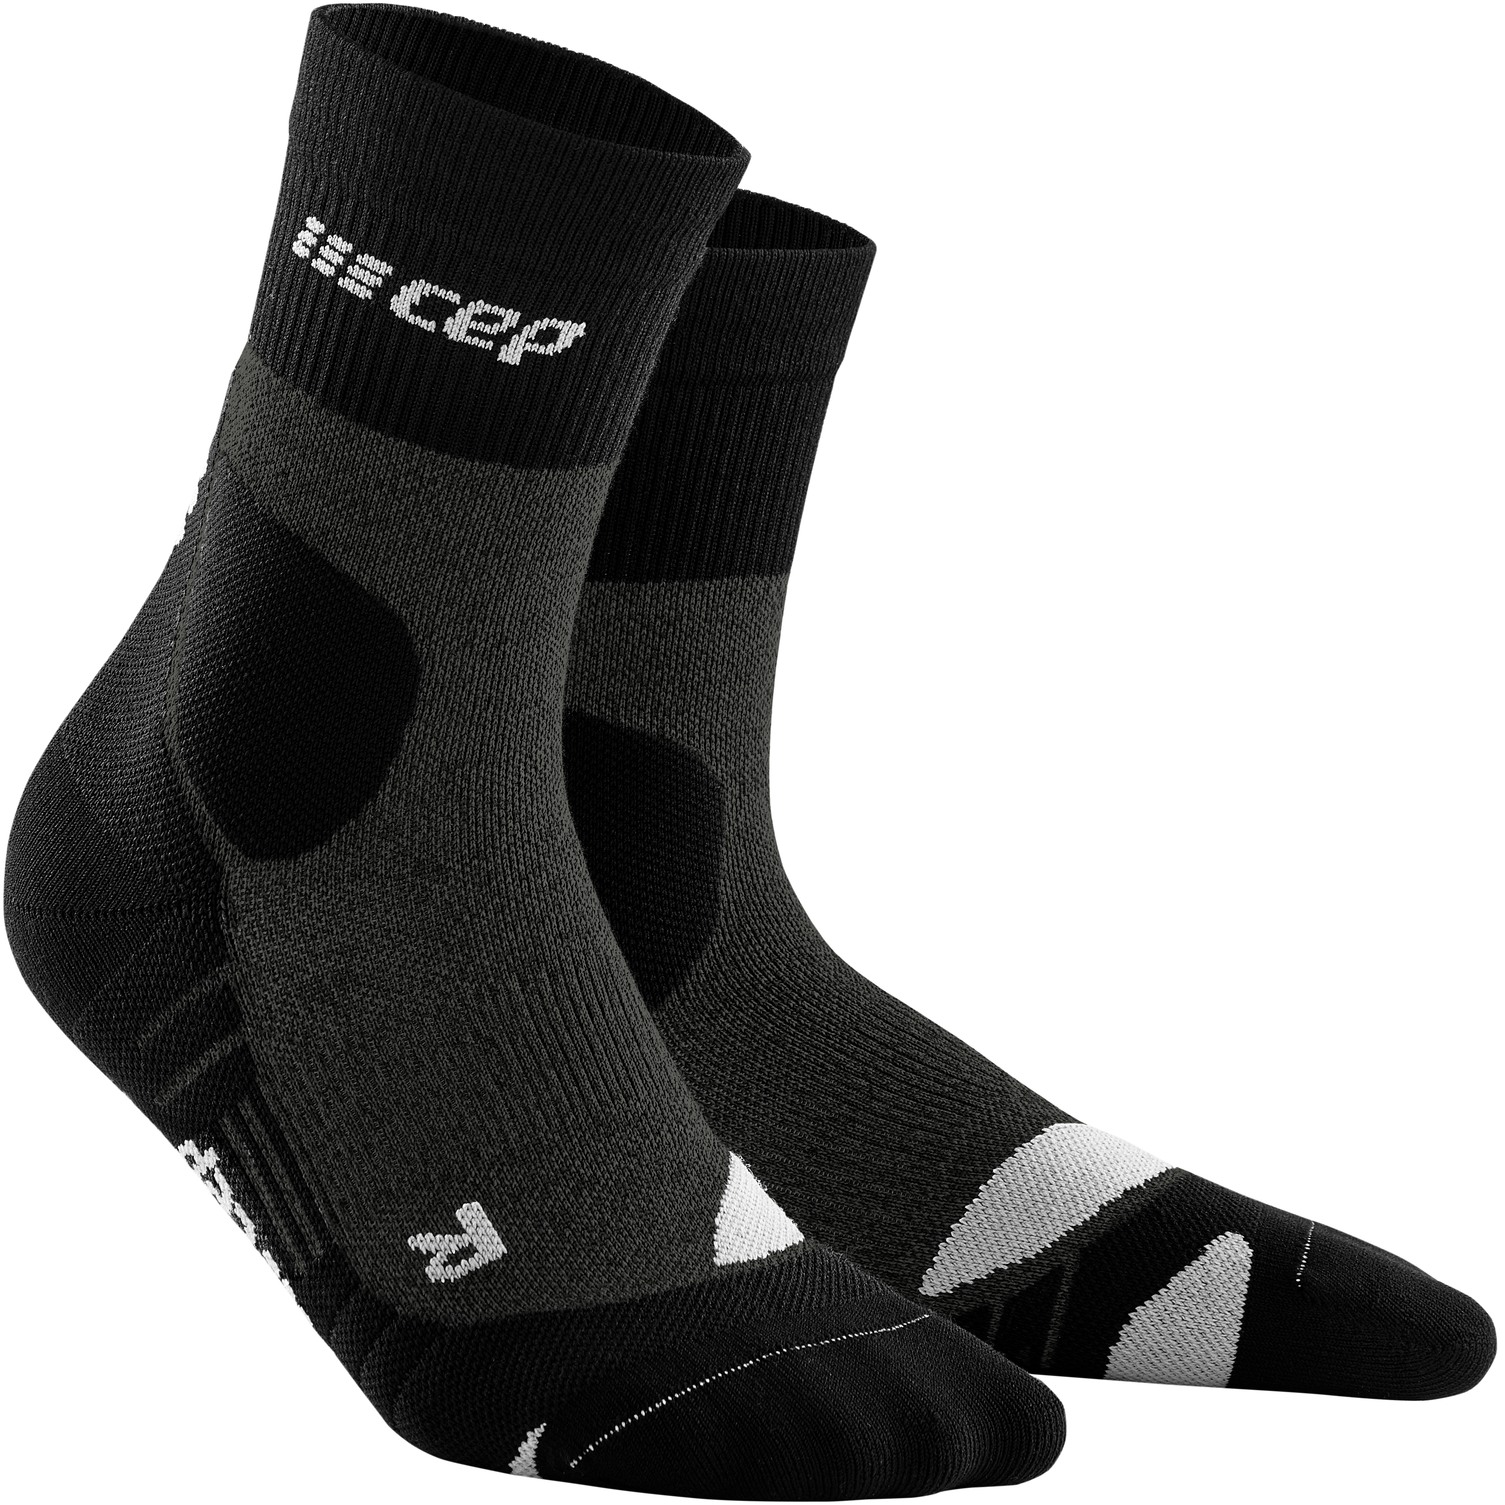 Picture of CEP Hiking Merino Mid Cut Compression Socks - stonegrey/grey